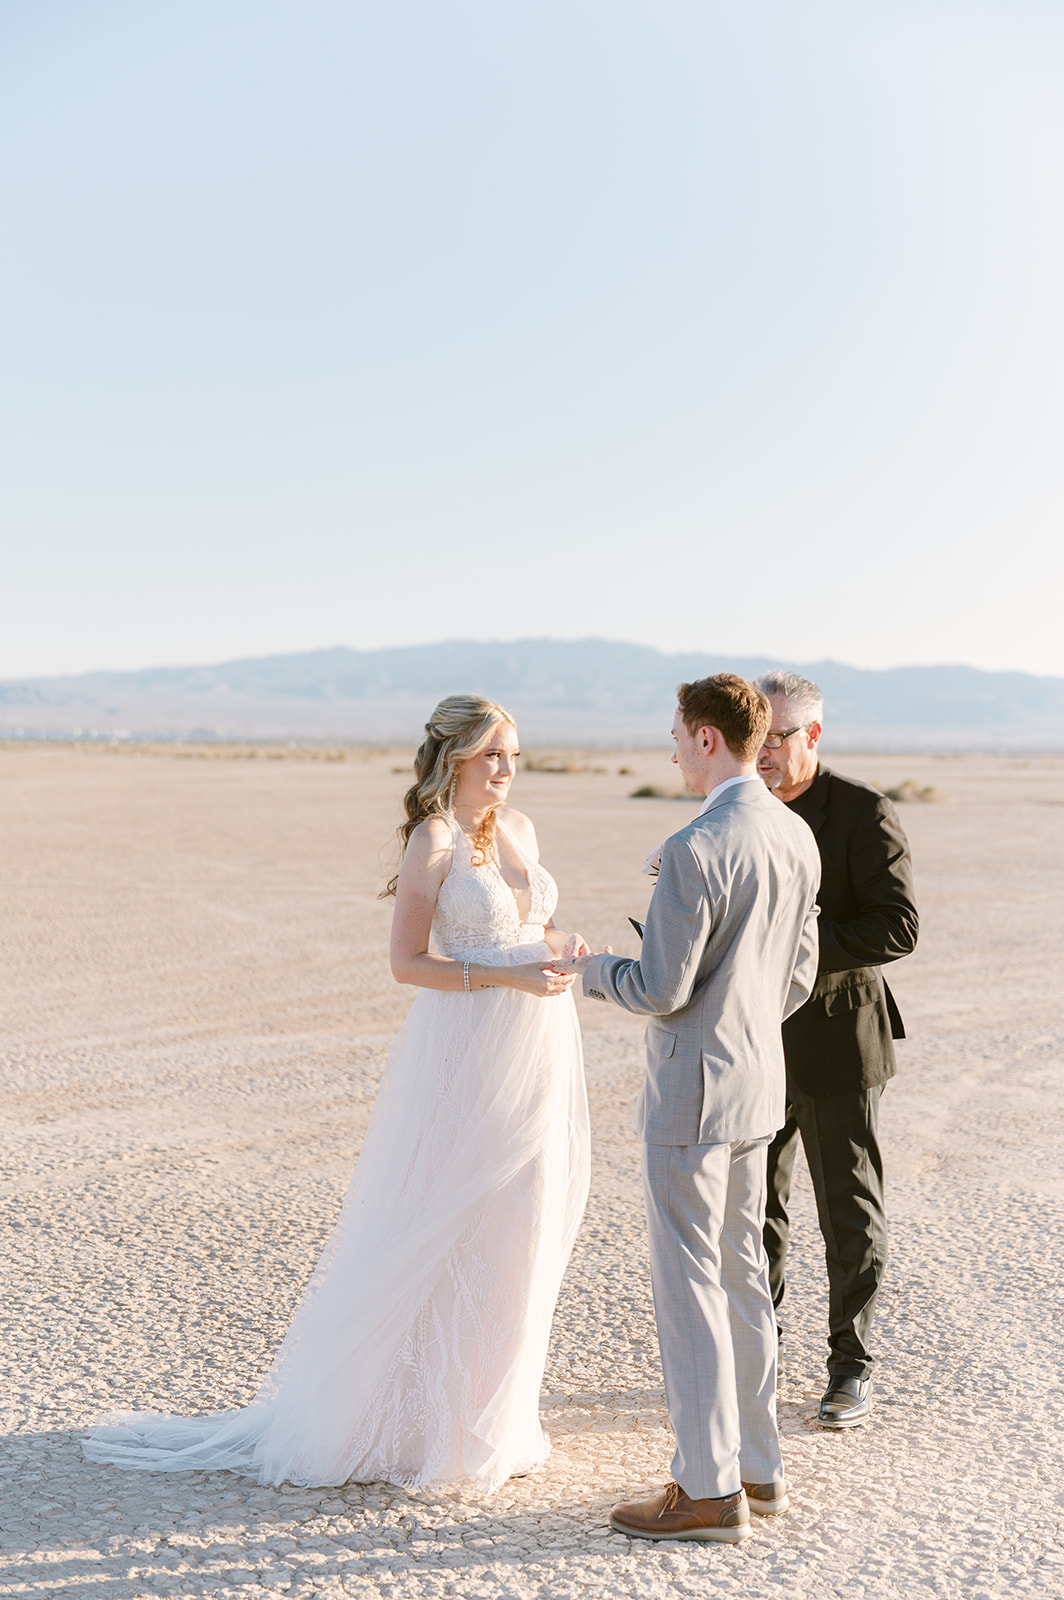 Bride smiles at the groom during their elopement ceremony organized by Elopement Las Vegas